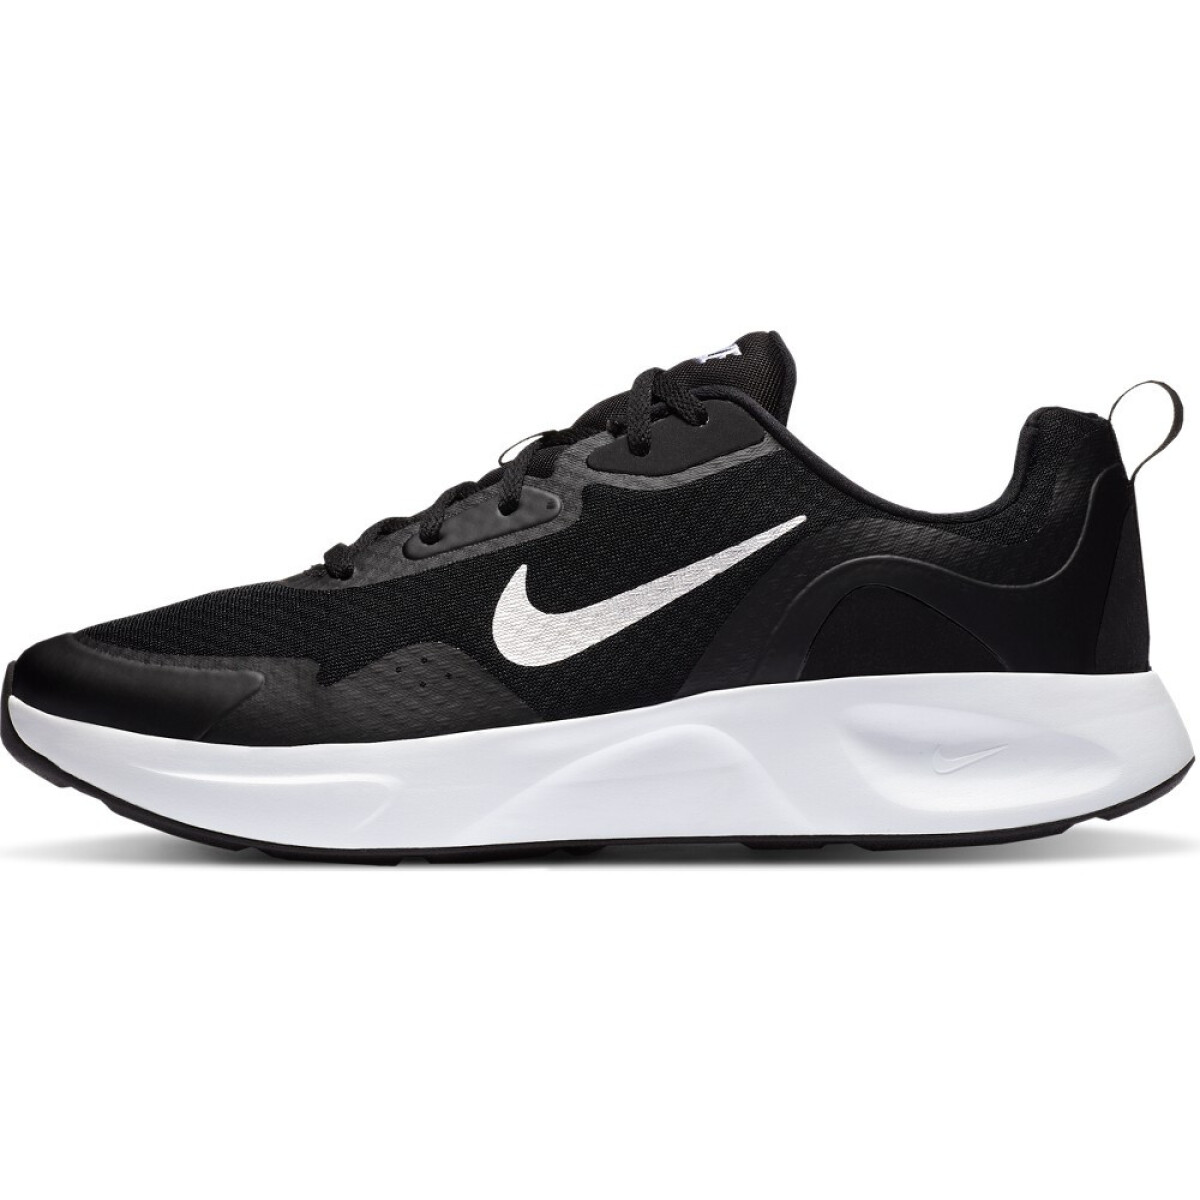 Champion Nike Running Hombre Wearallday - S/C 